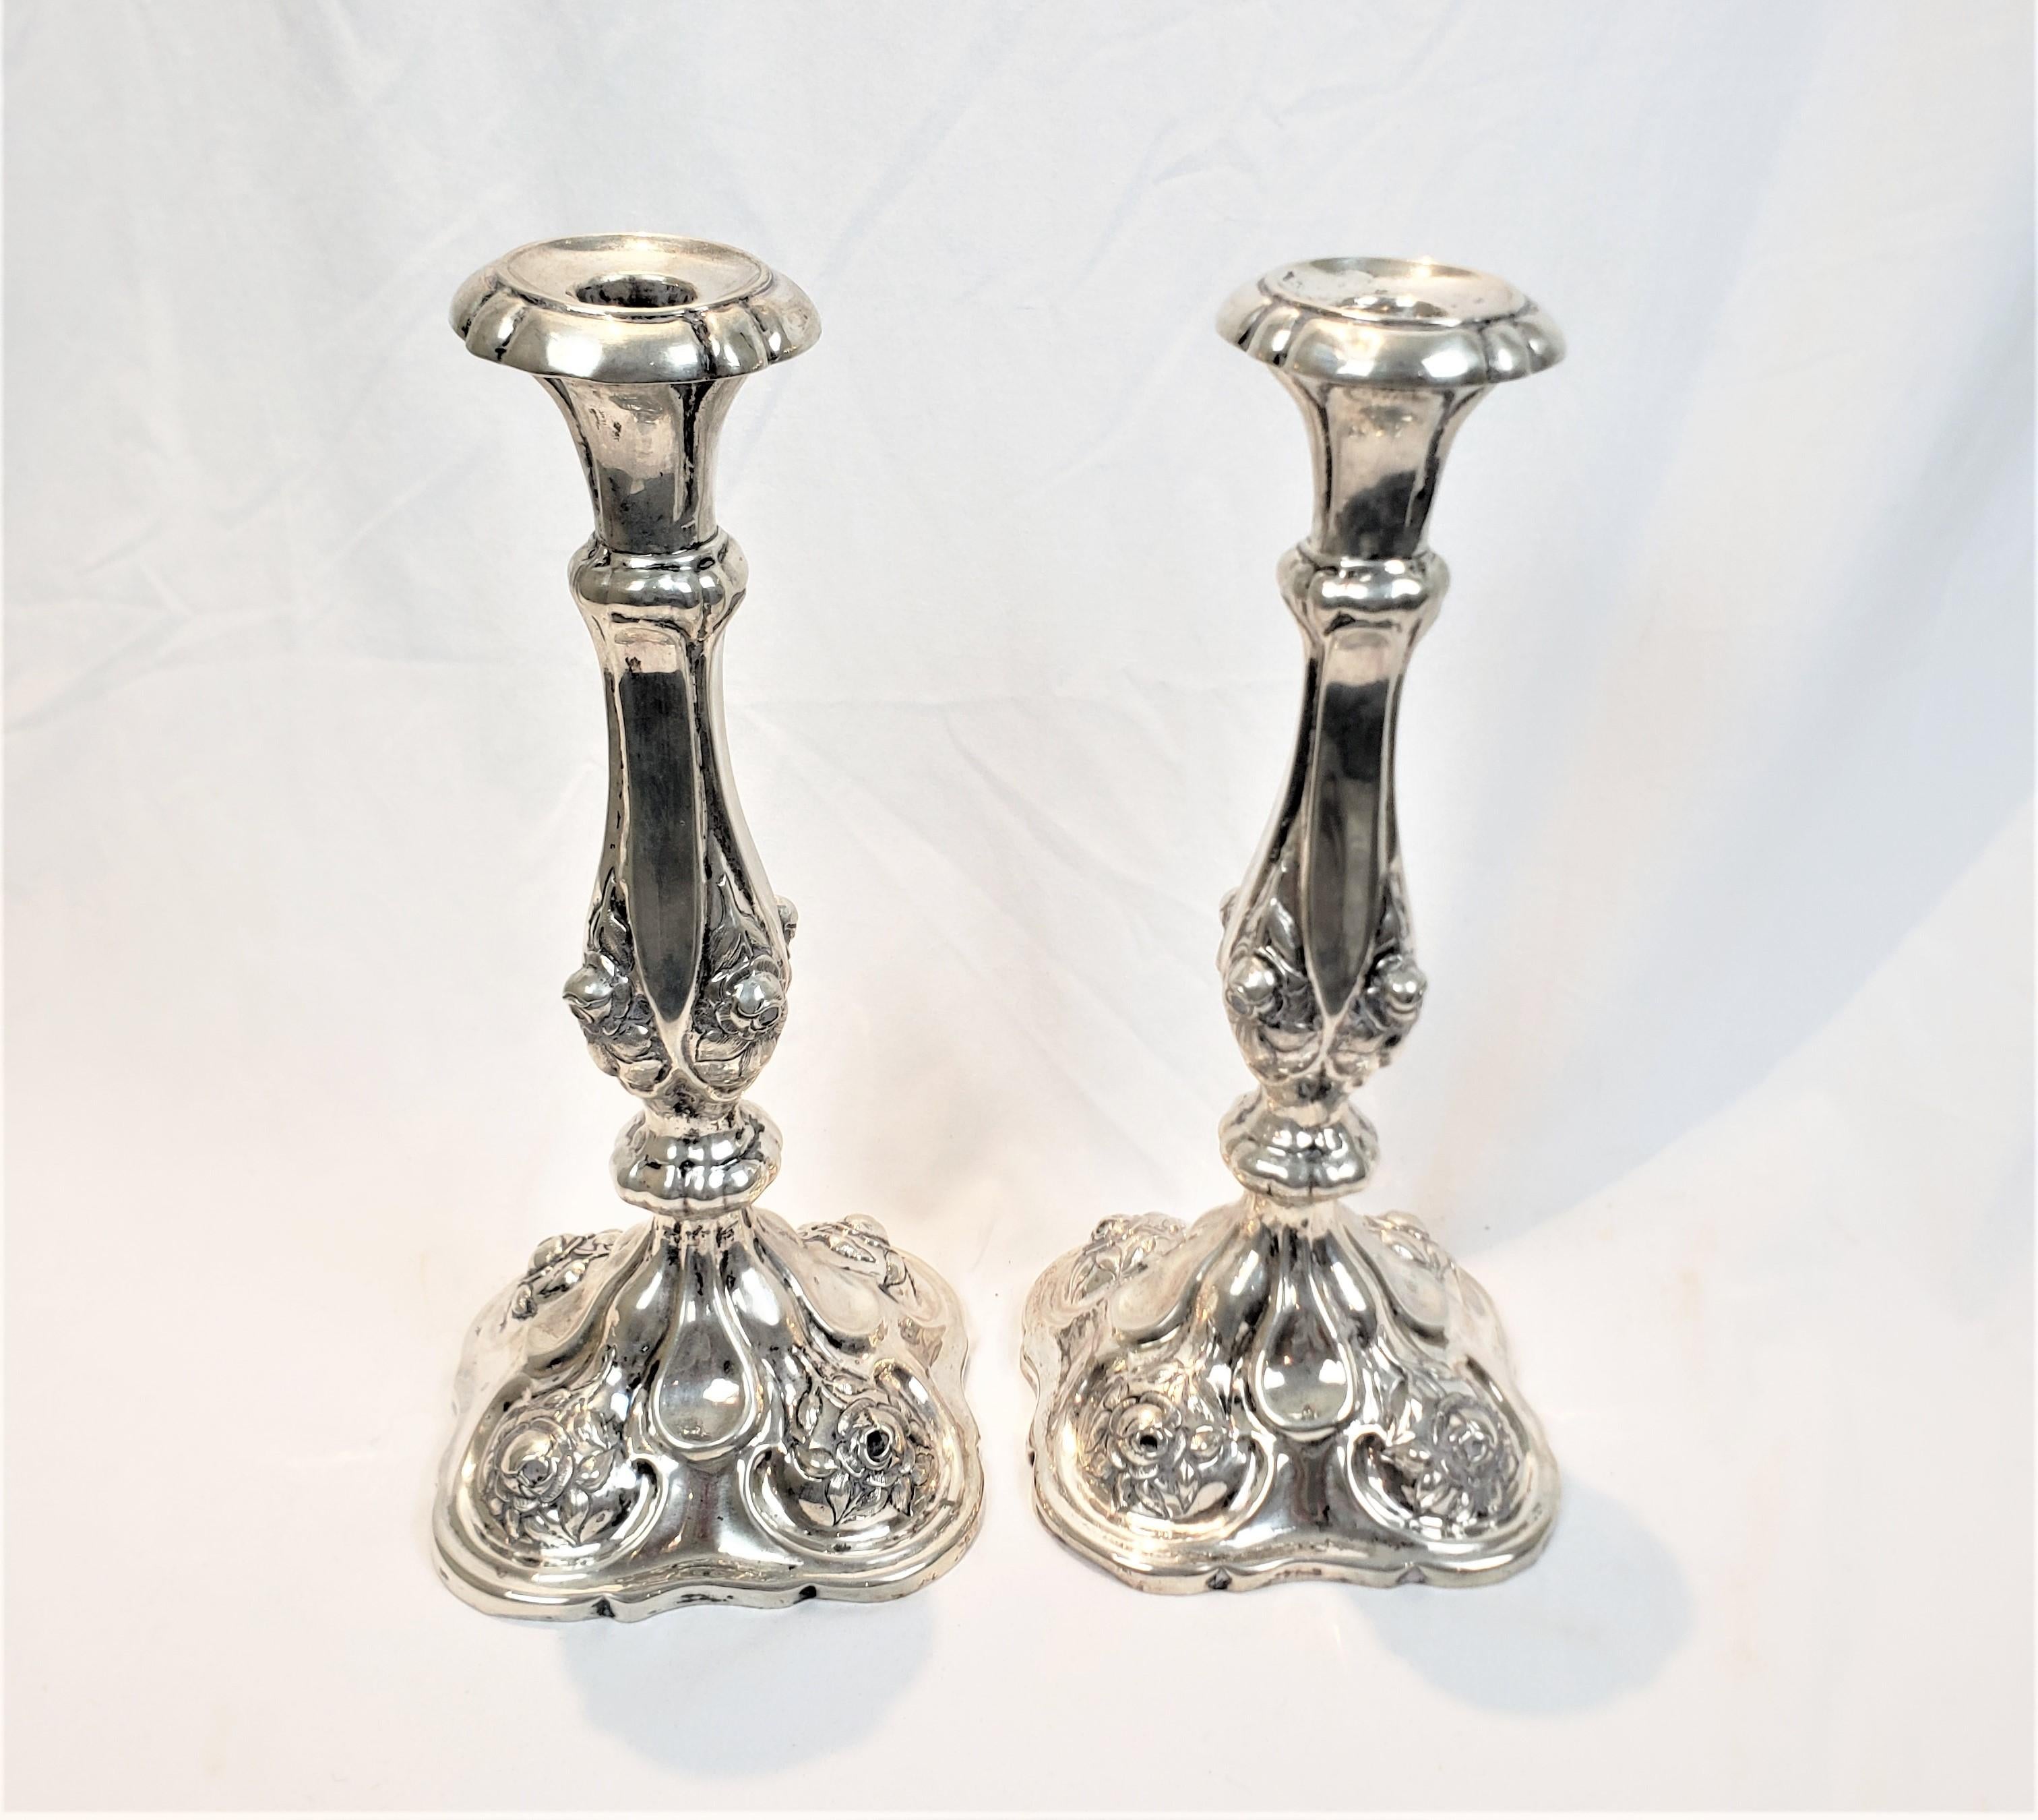 This pair of silver candlesticks are hallmarked by an unknown maker, and believed to have originated from the Austro-Hungarian Empire and date to approximately 1850, and done in the period style. These candlesticks are composed of .800 silver, if